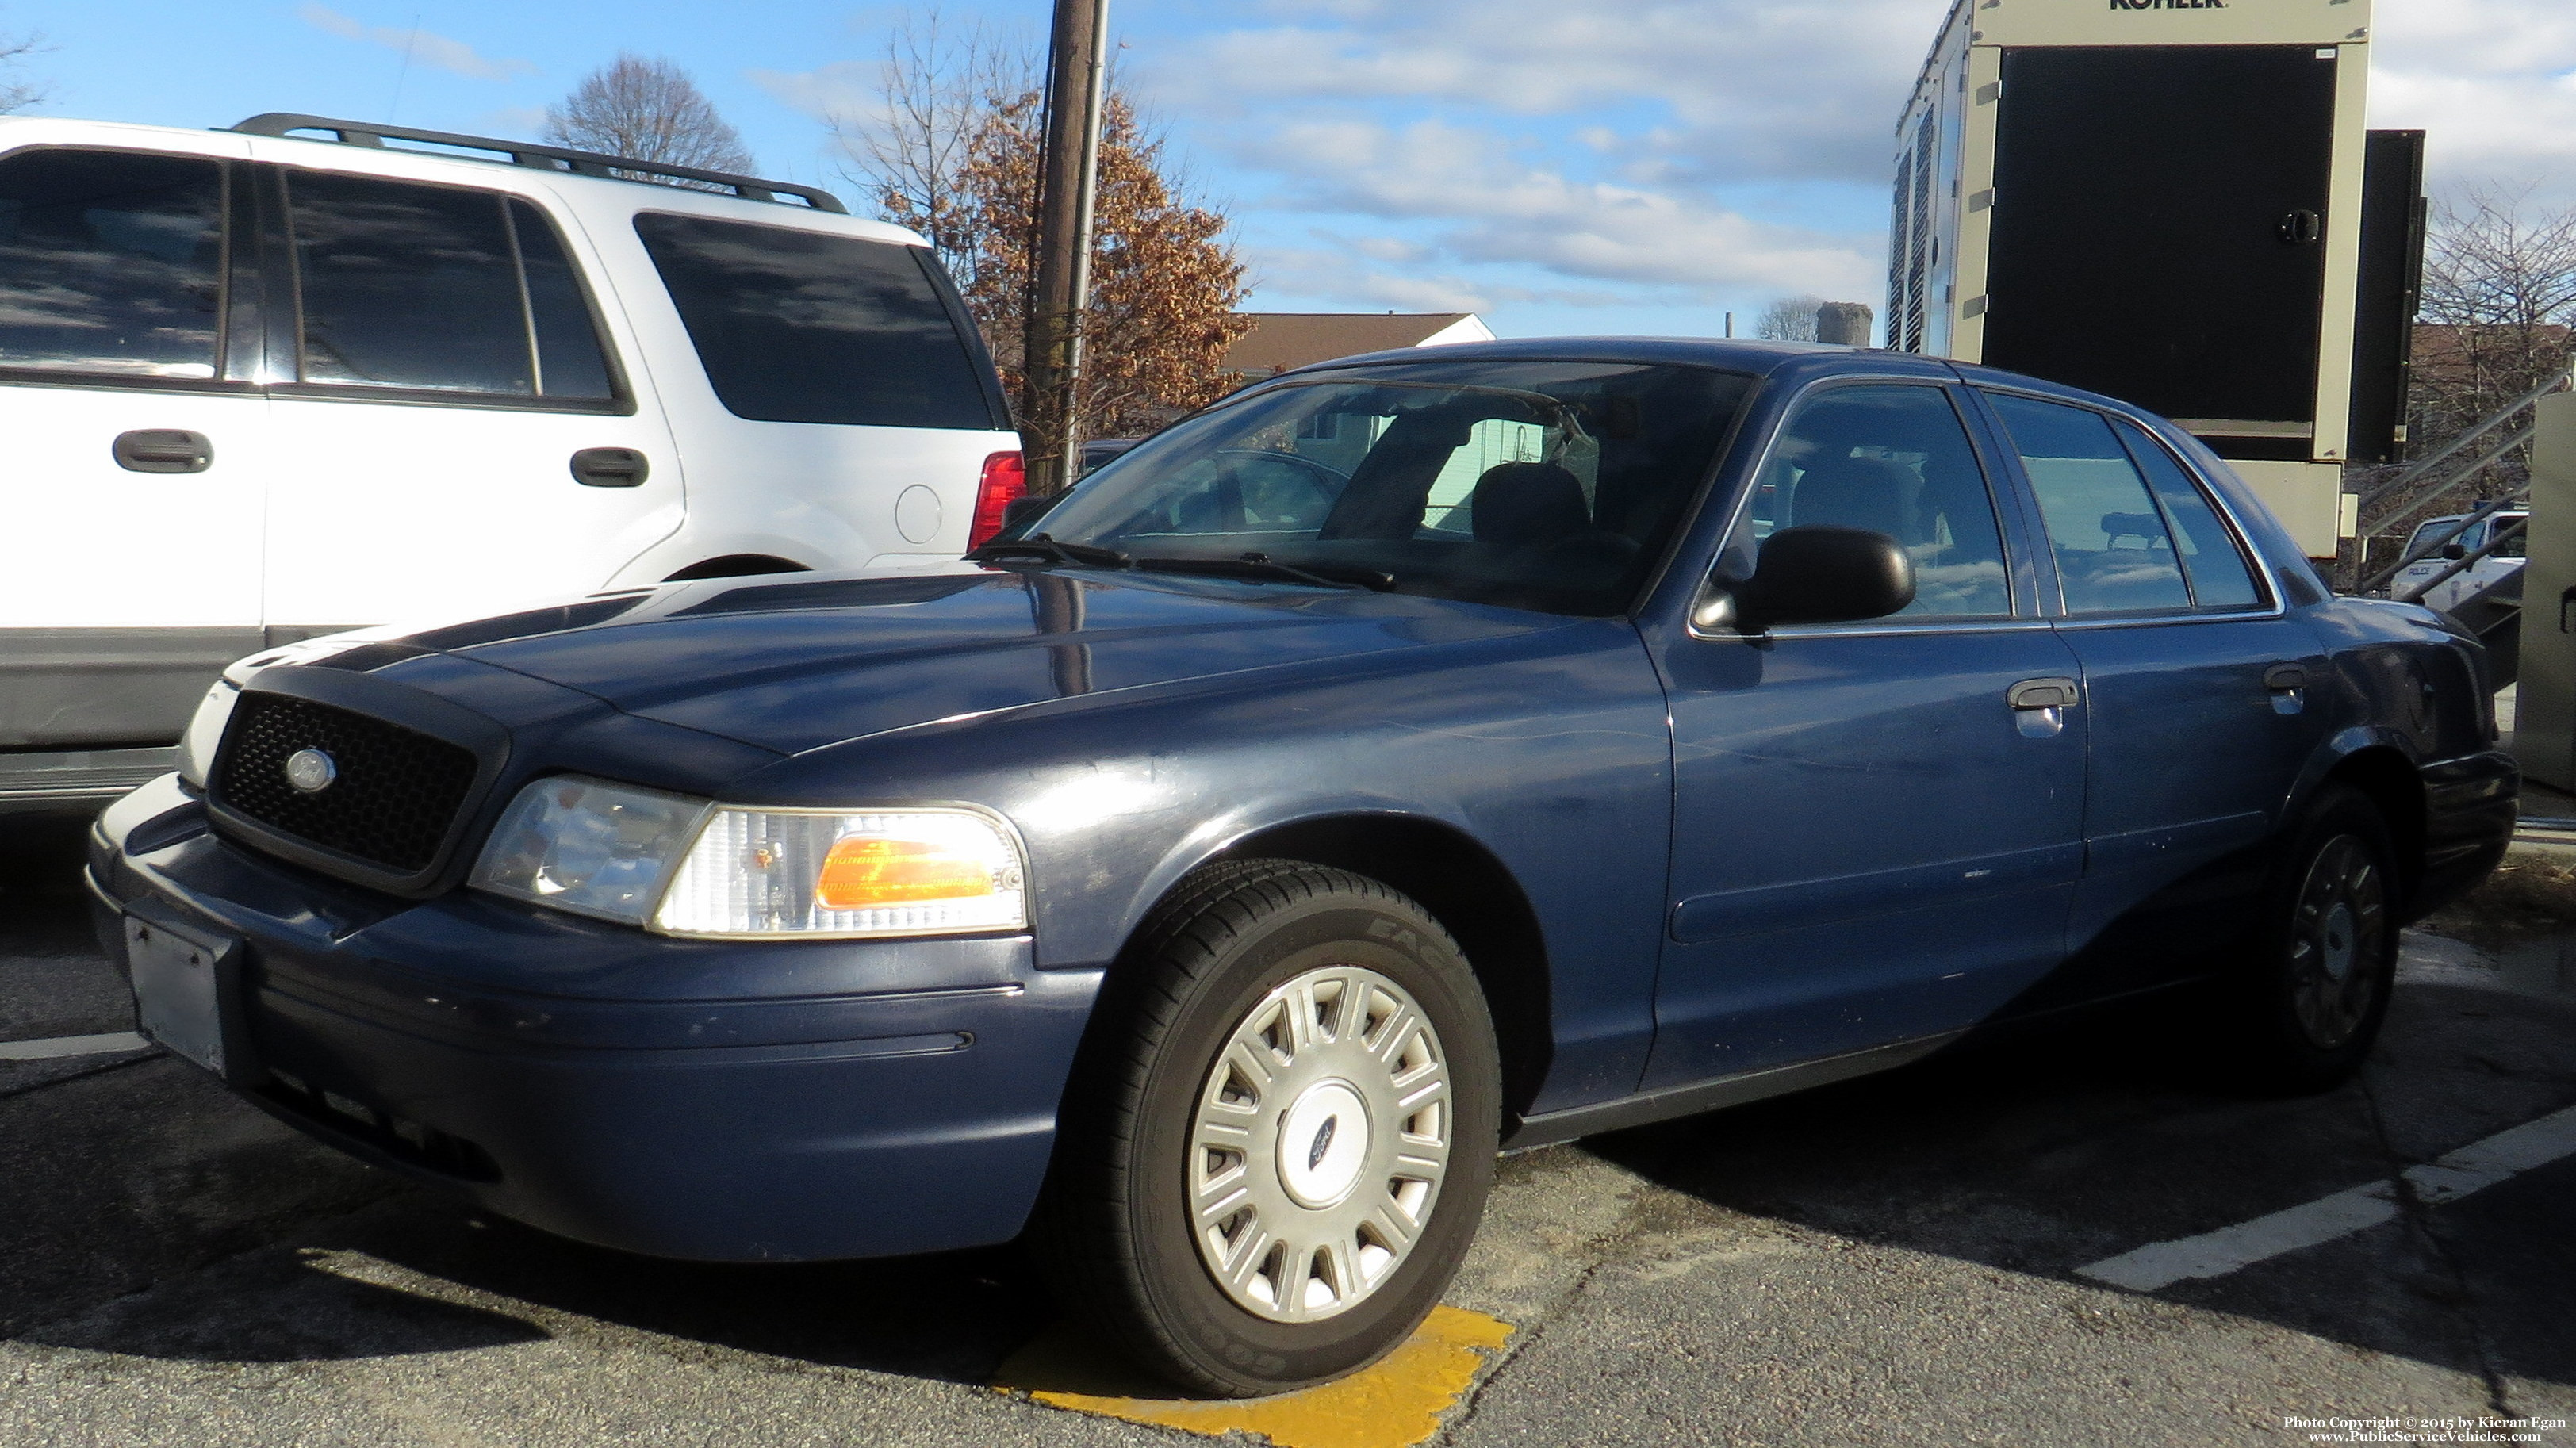 A photo  of North Kingstown Police
            Unmarked Unit, a 2003-2005 Ford Crown Victoria Police Interceptor             taken by Kieran Egan